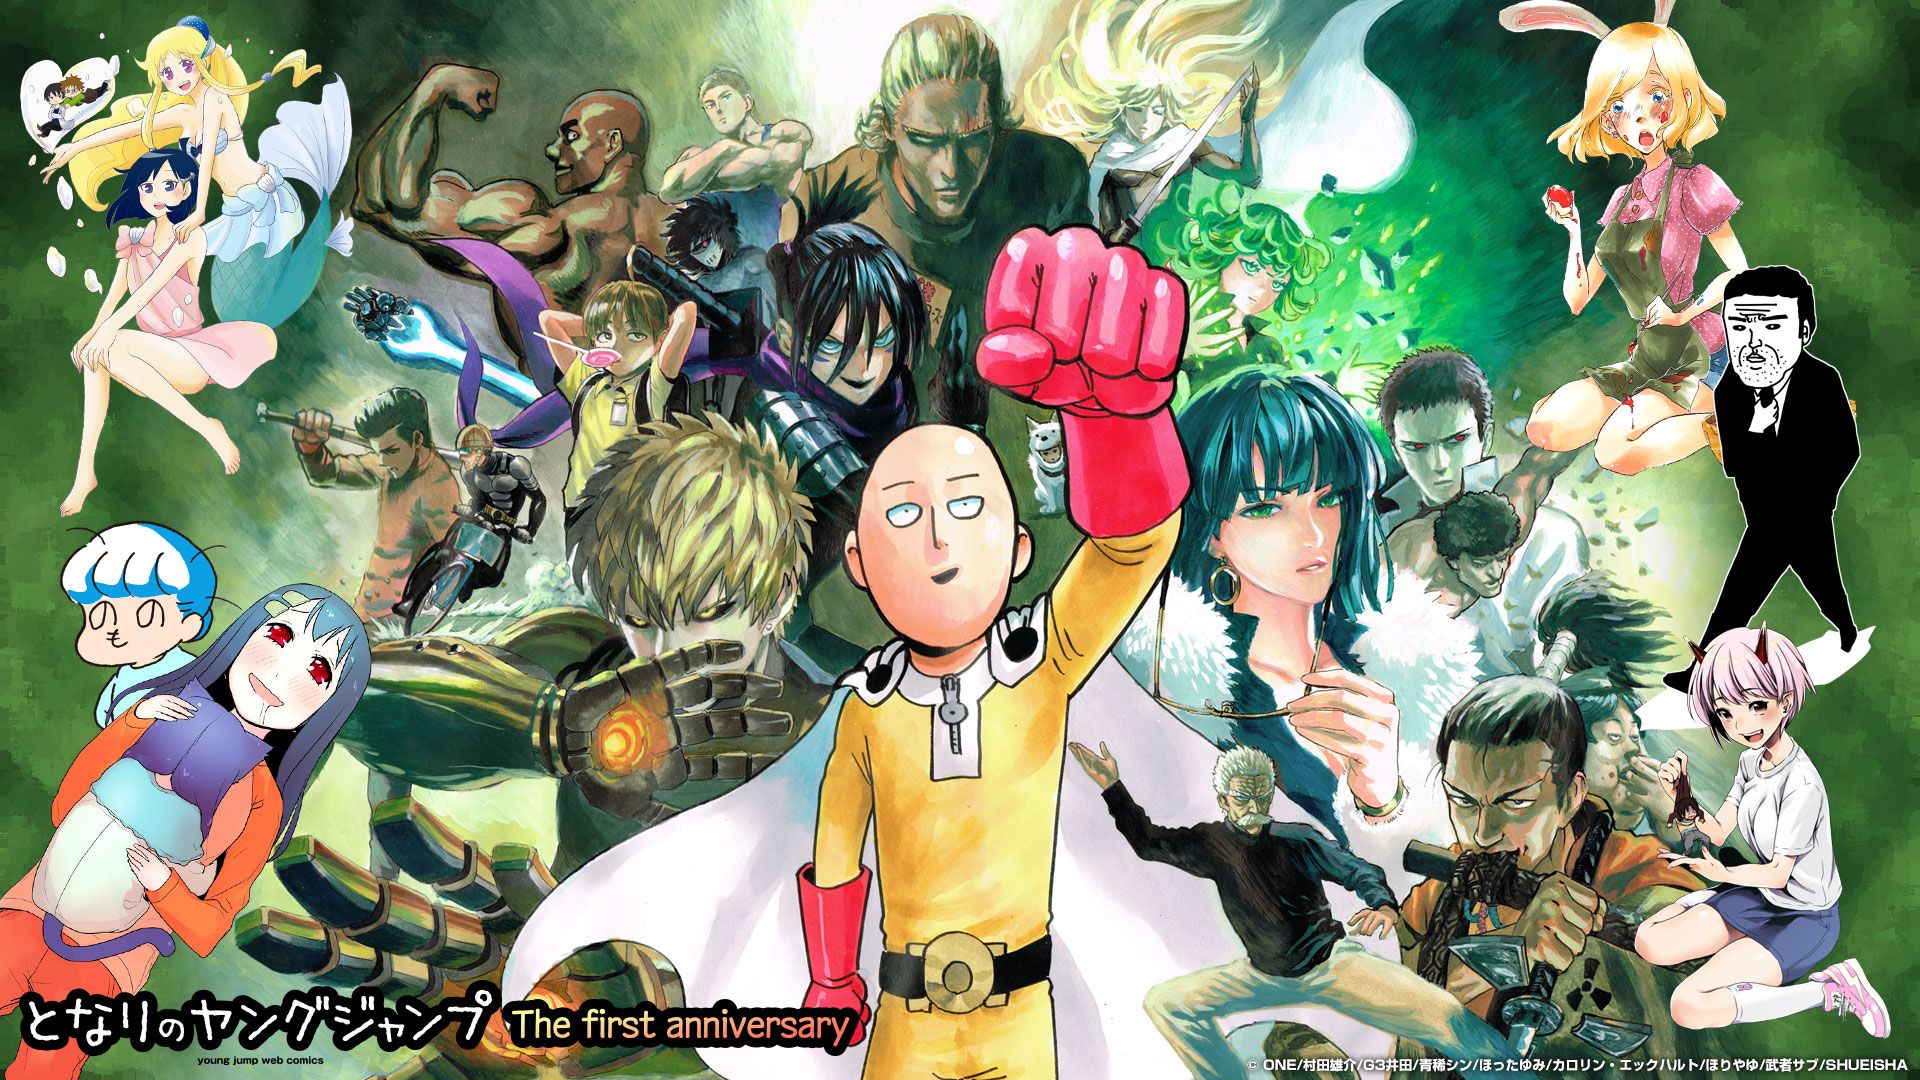 One punch man HD wallpapers